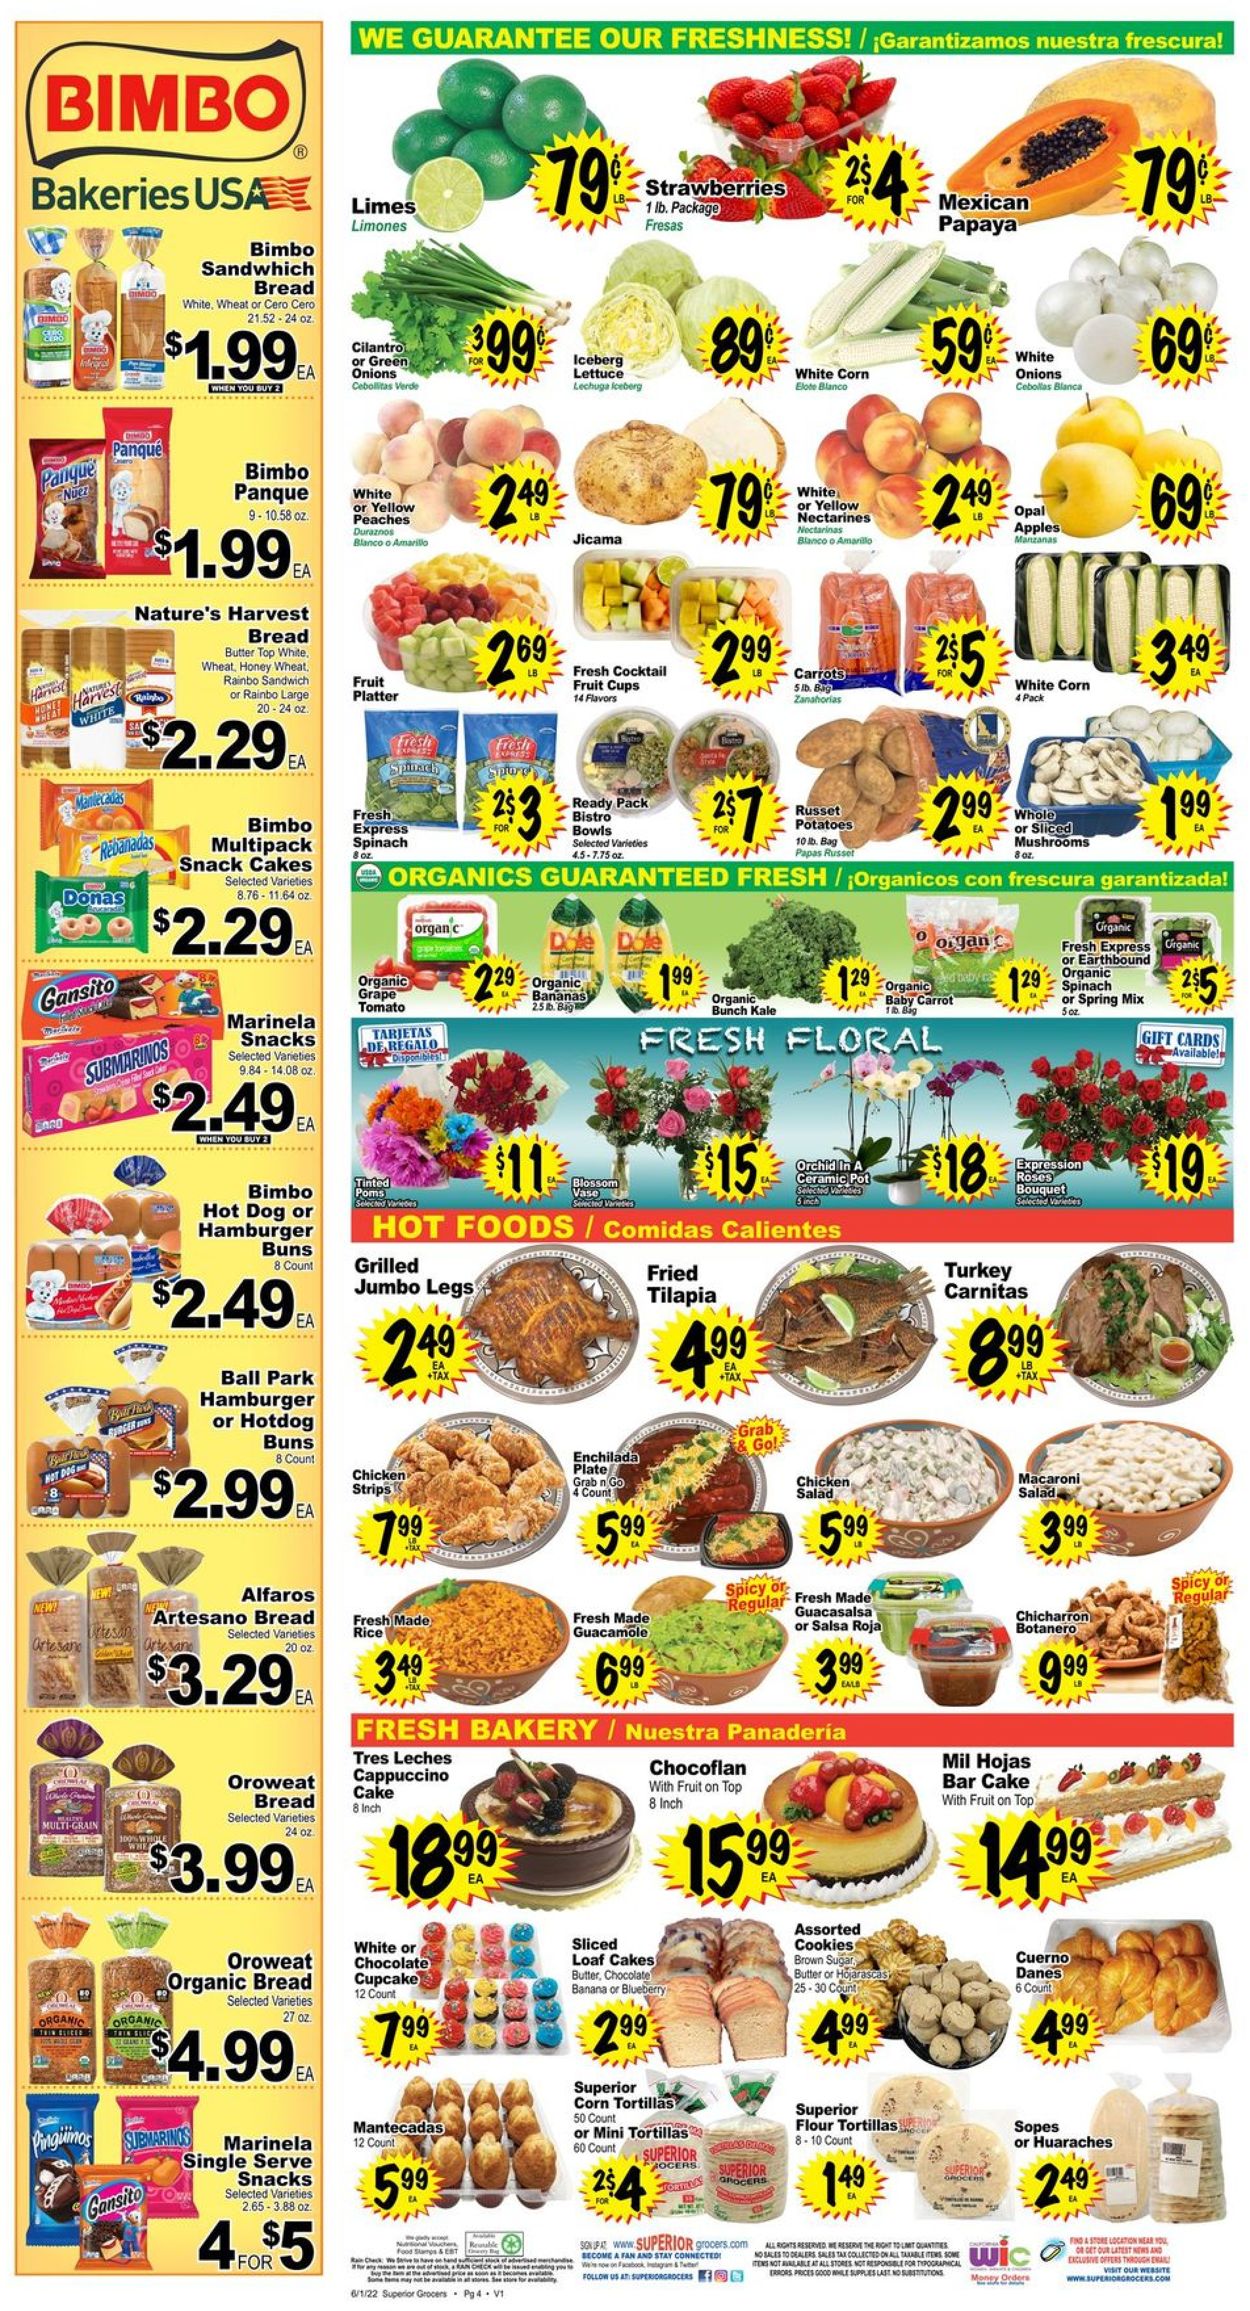 Superior Grocers Ad from 06/01/2022